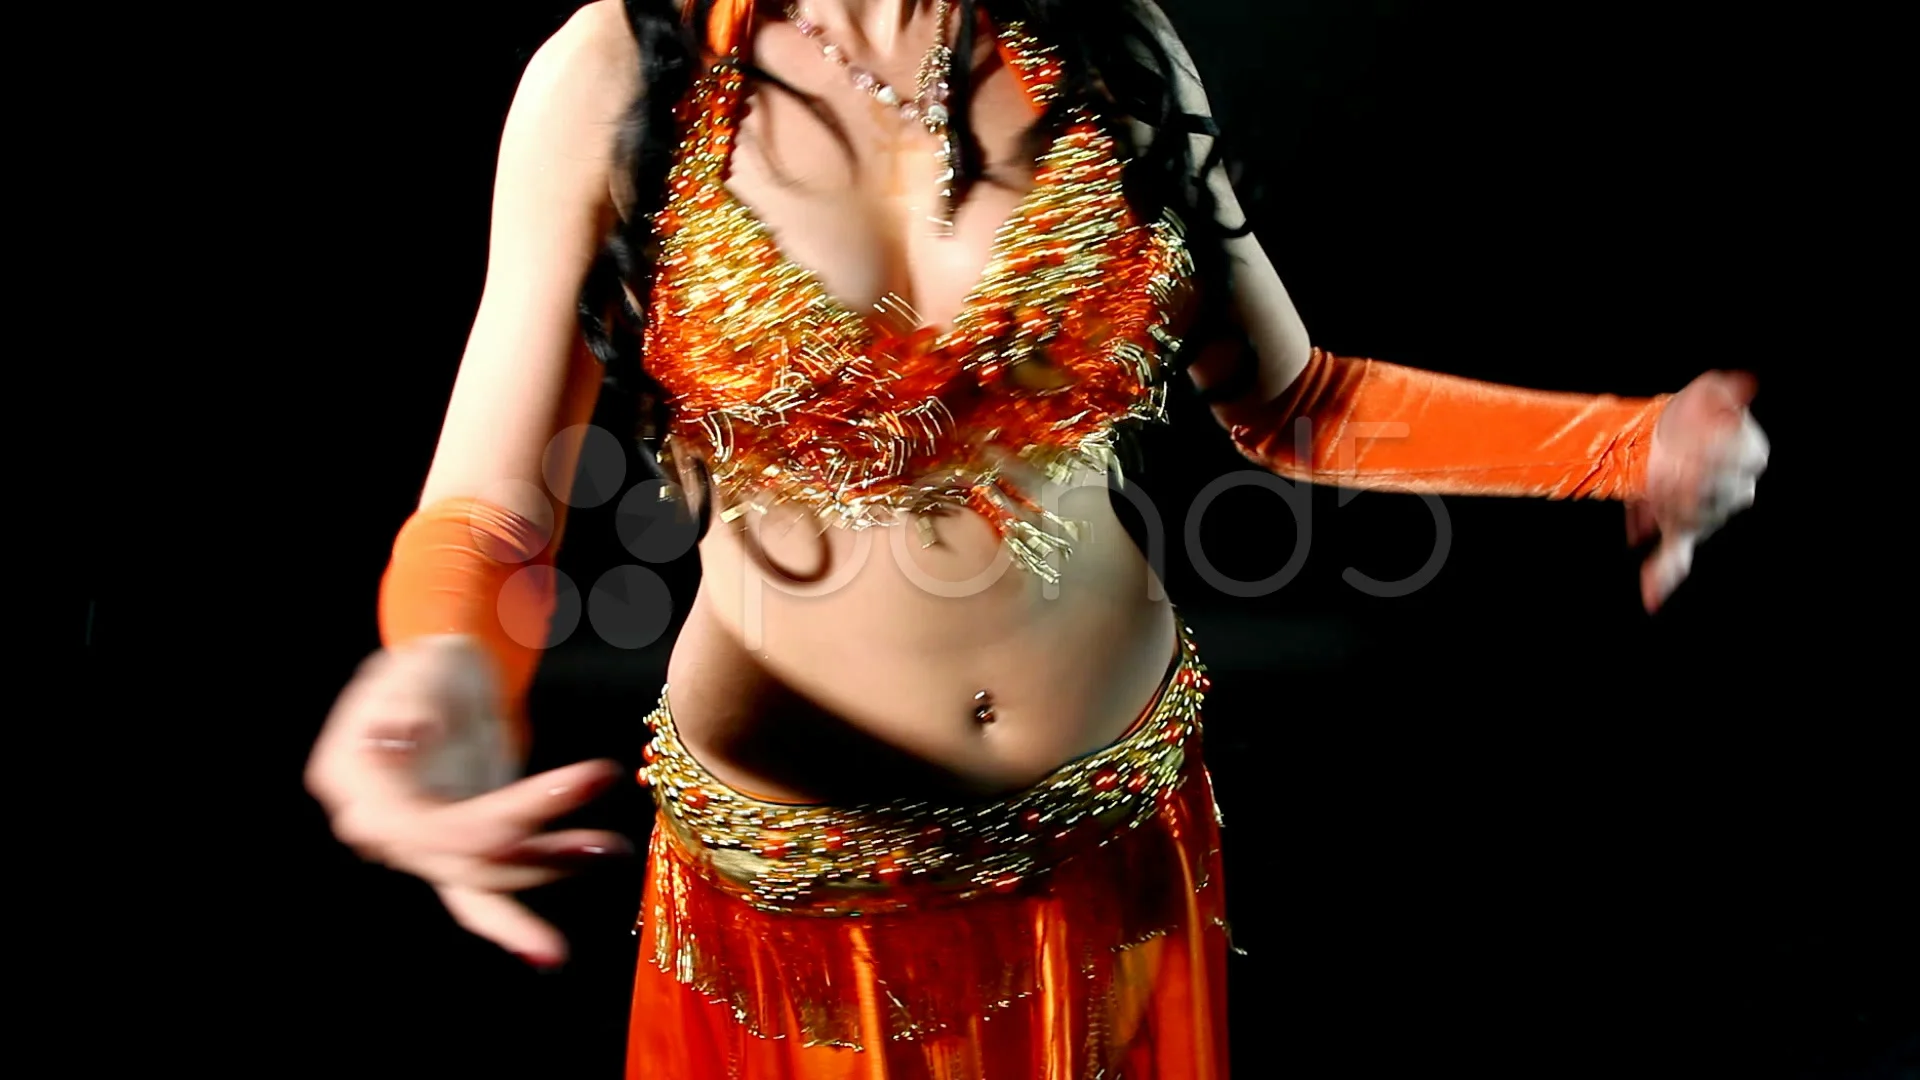 Woman Belly Dance Shake Breasts Stock Footage Video (100% Royalty-free)  963172